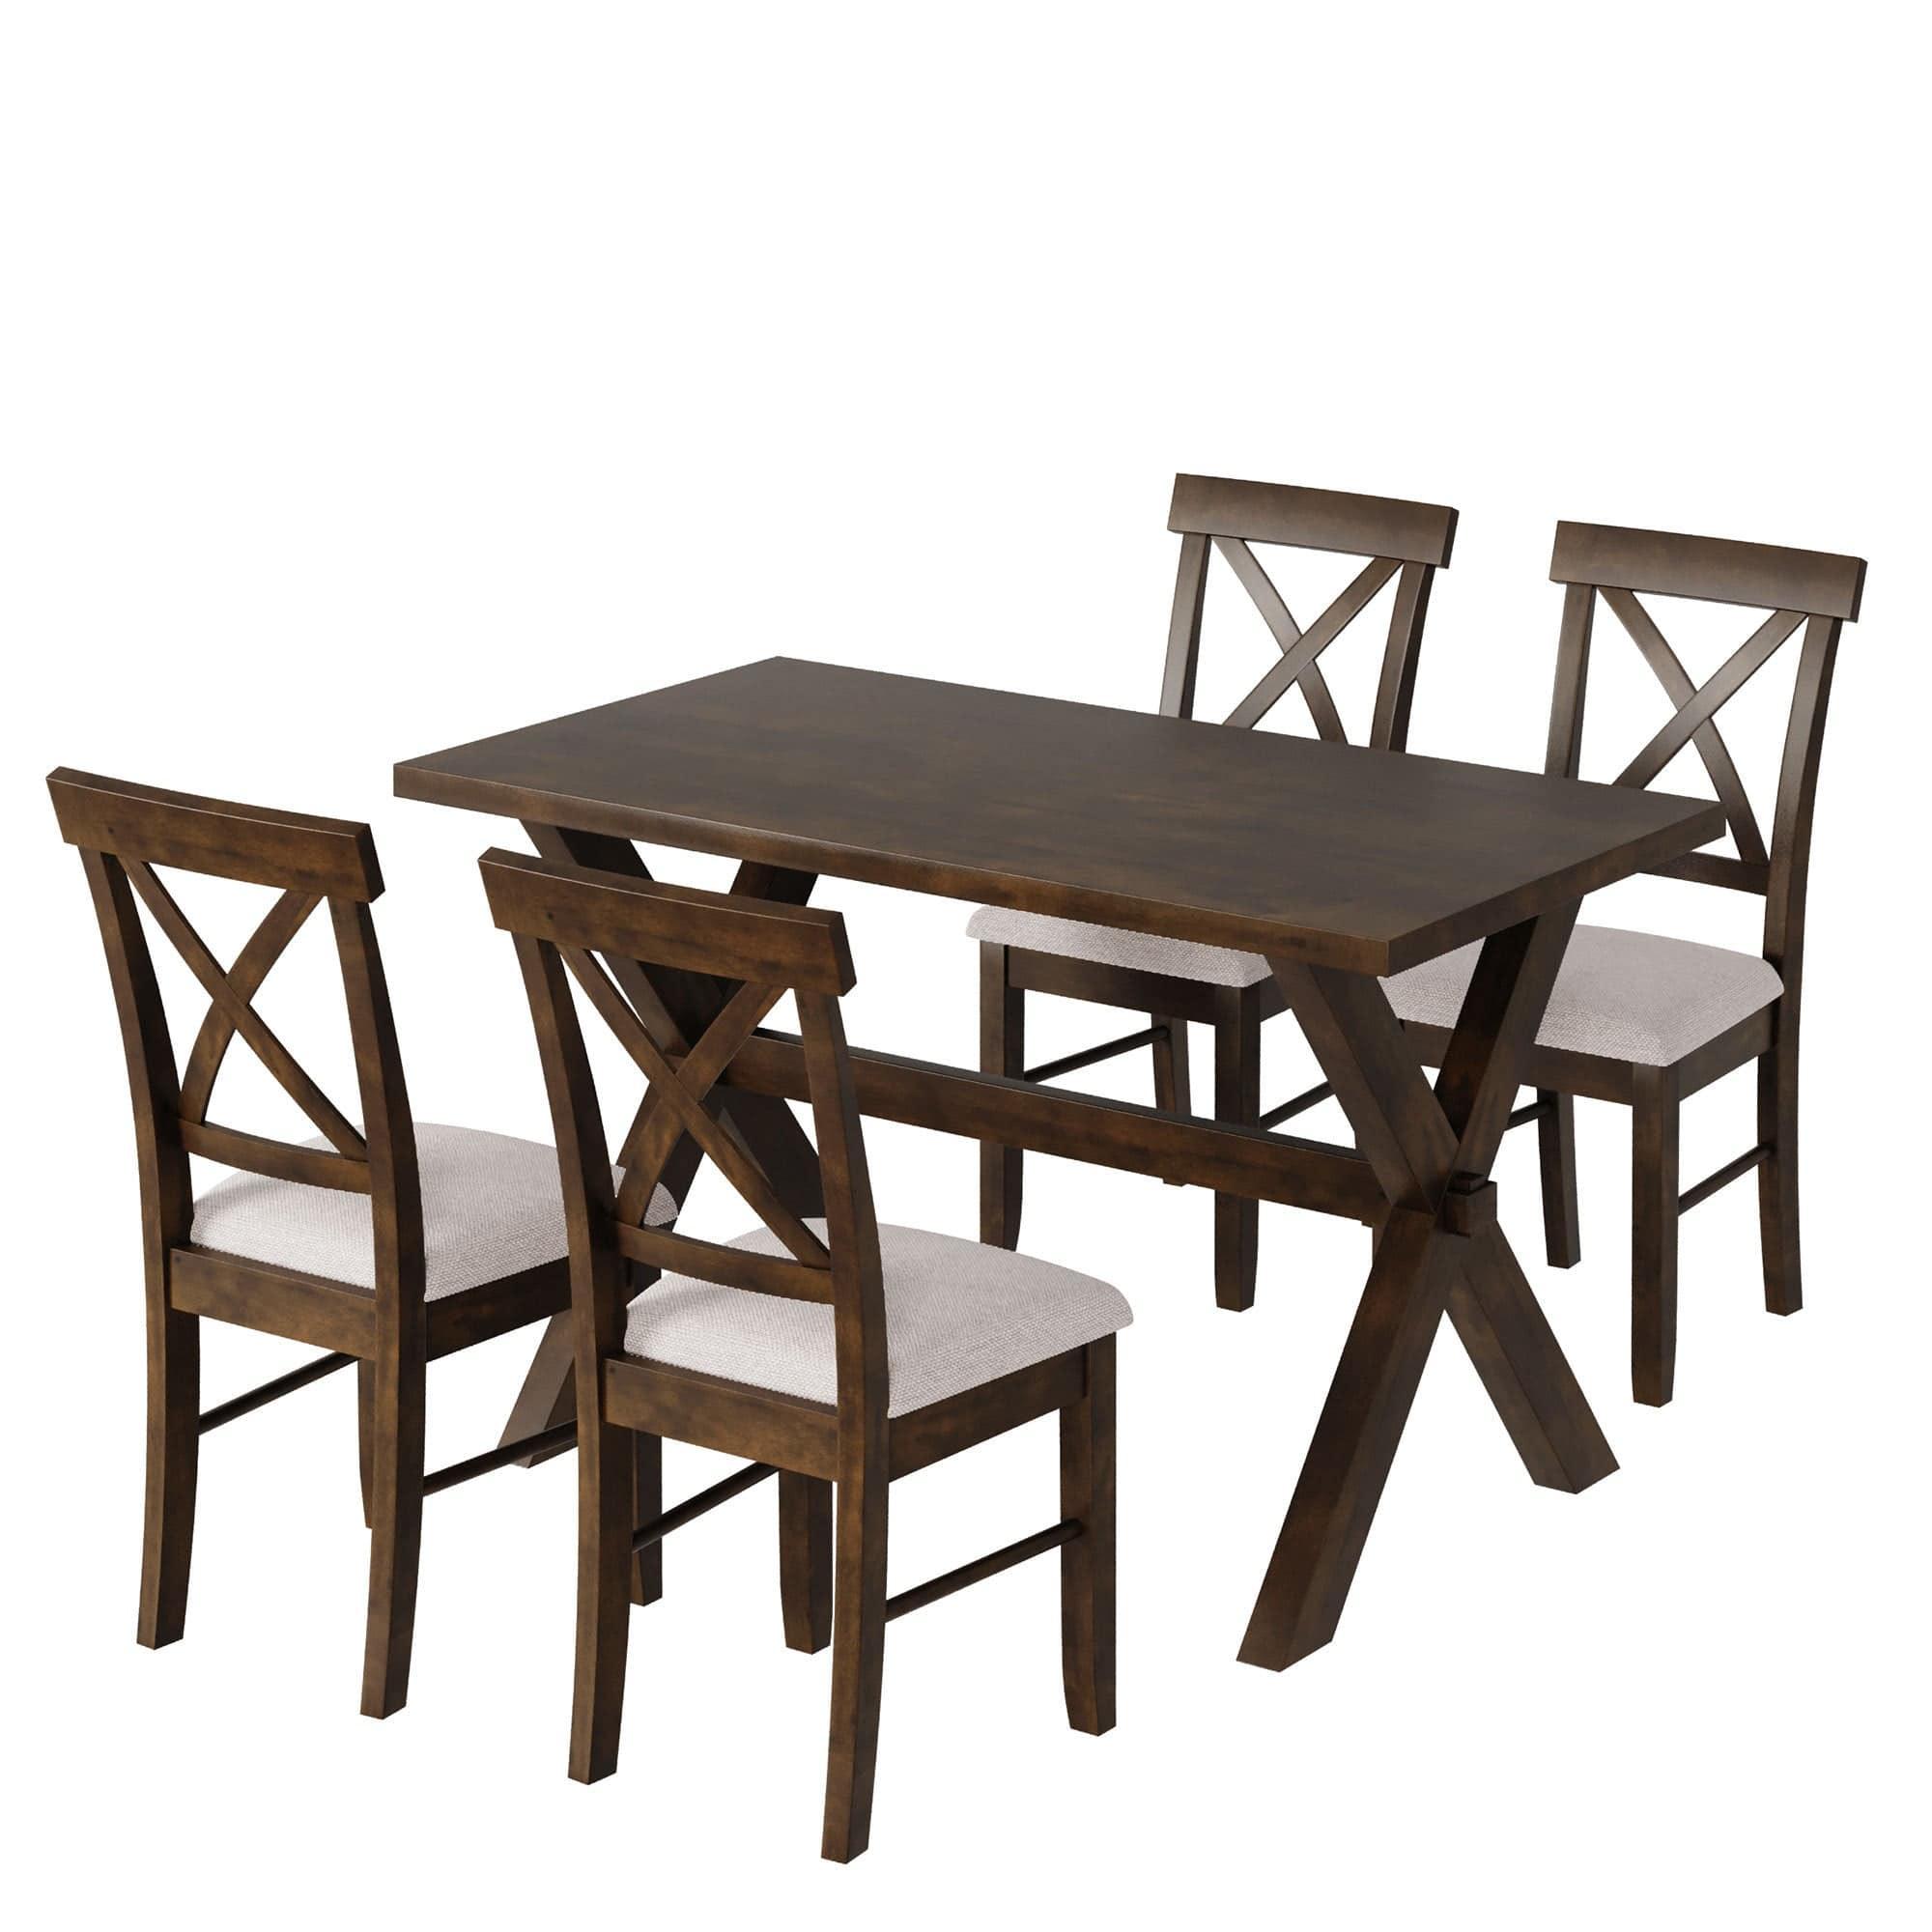 Shop TOPMAX 5 Pieces Farmhouse Rustic Wood Kitchen Dining Table Set with Upholstered 4 X-back Chairs, Brown+Beige Mademoiselle Home Decor